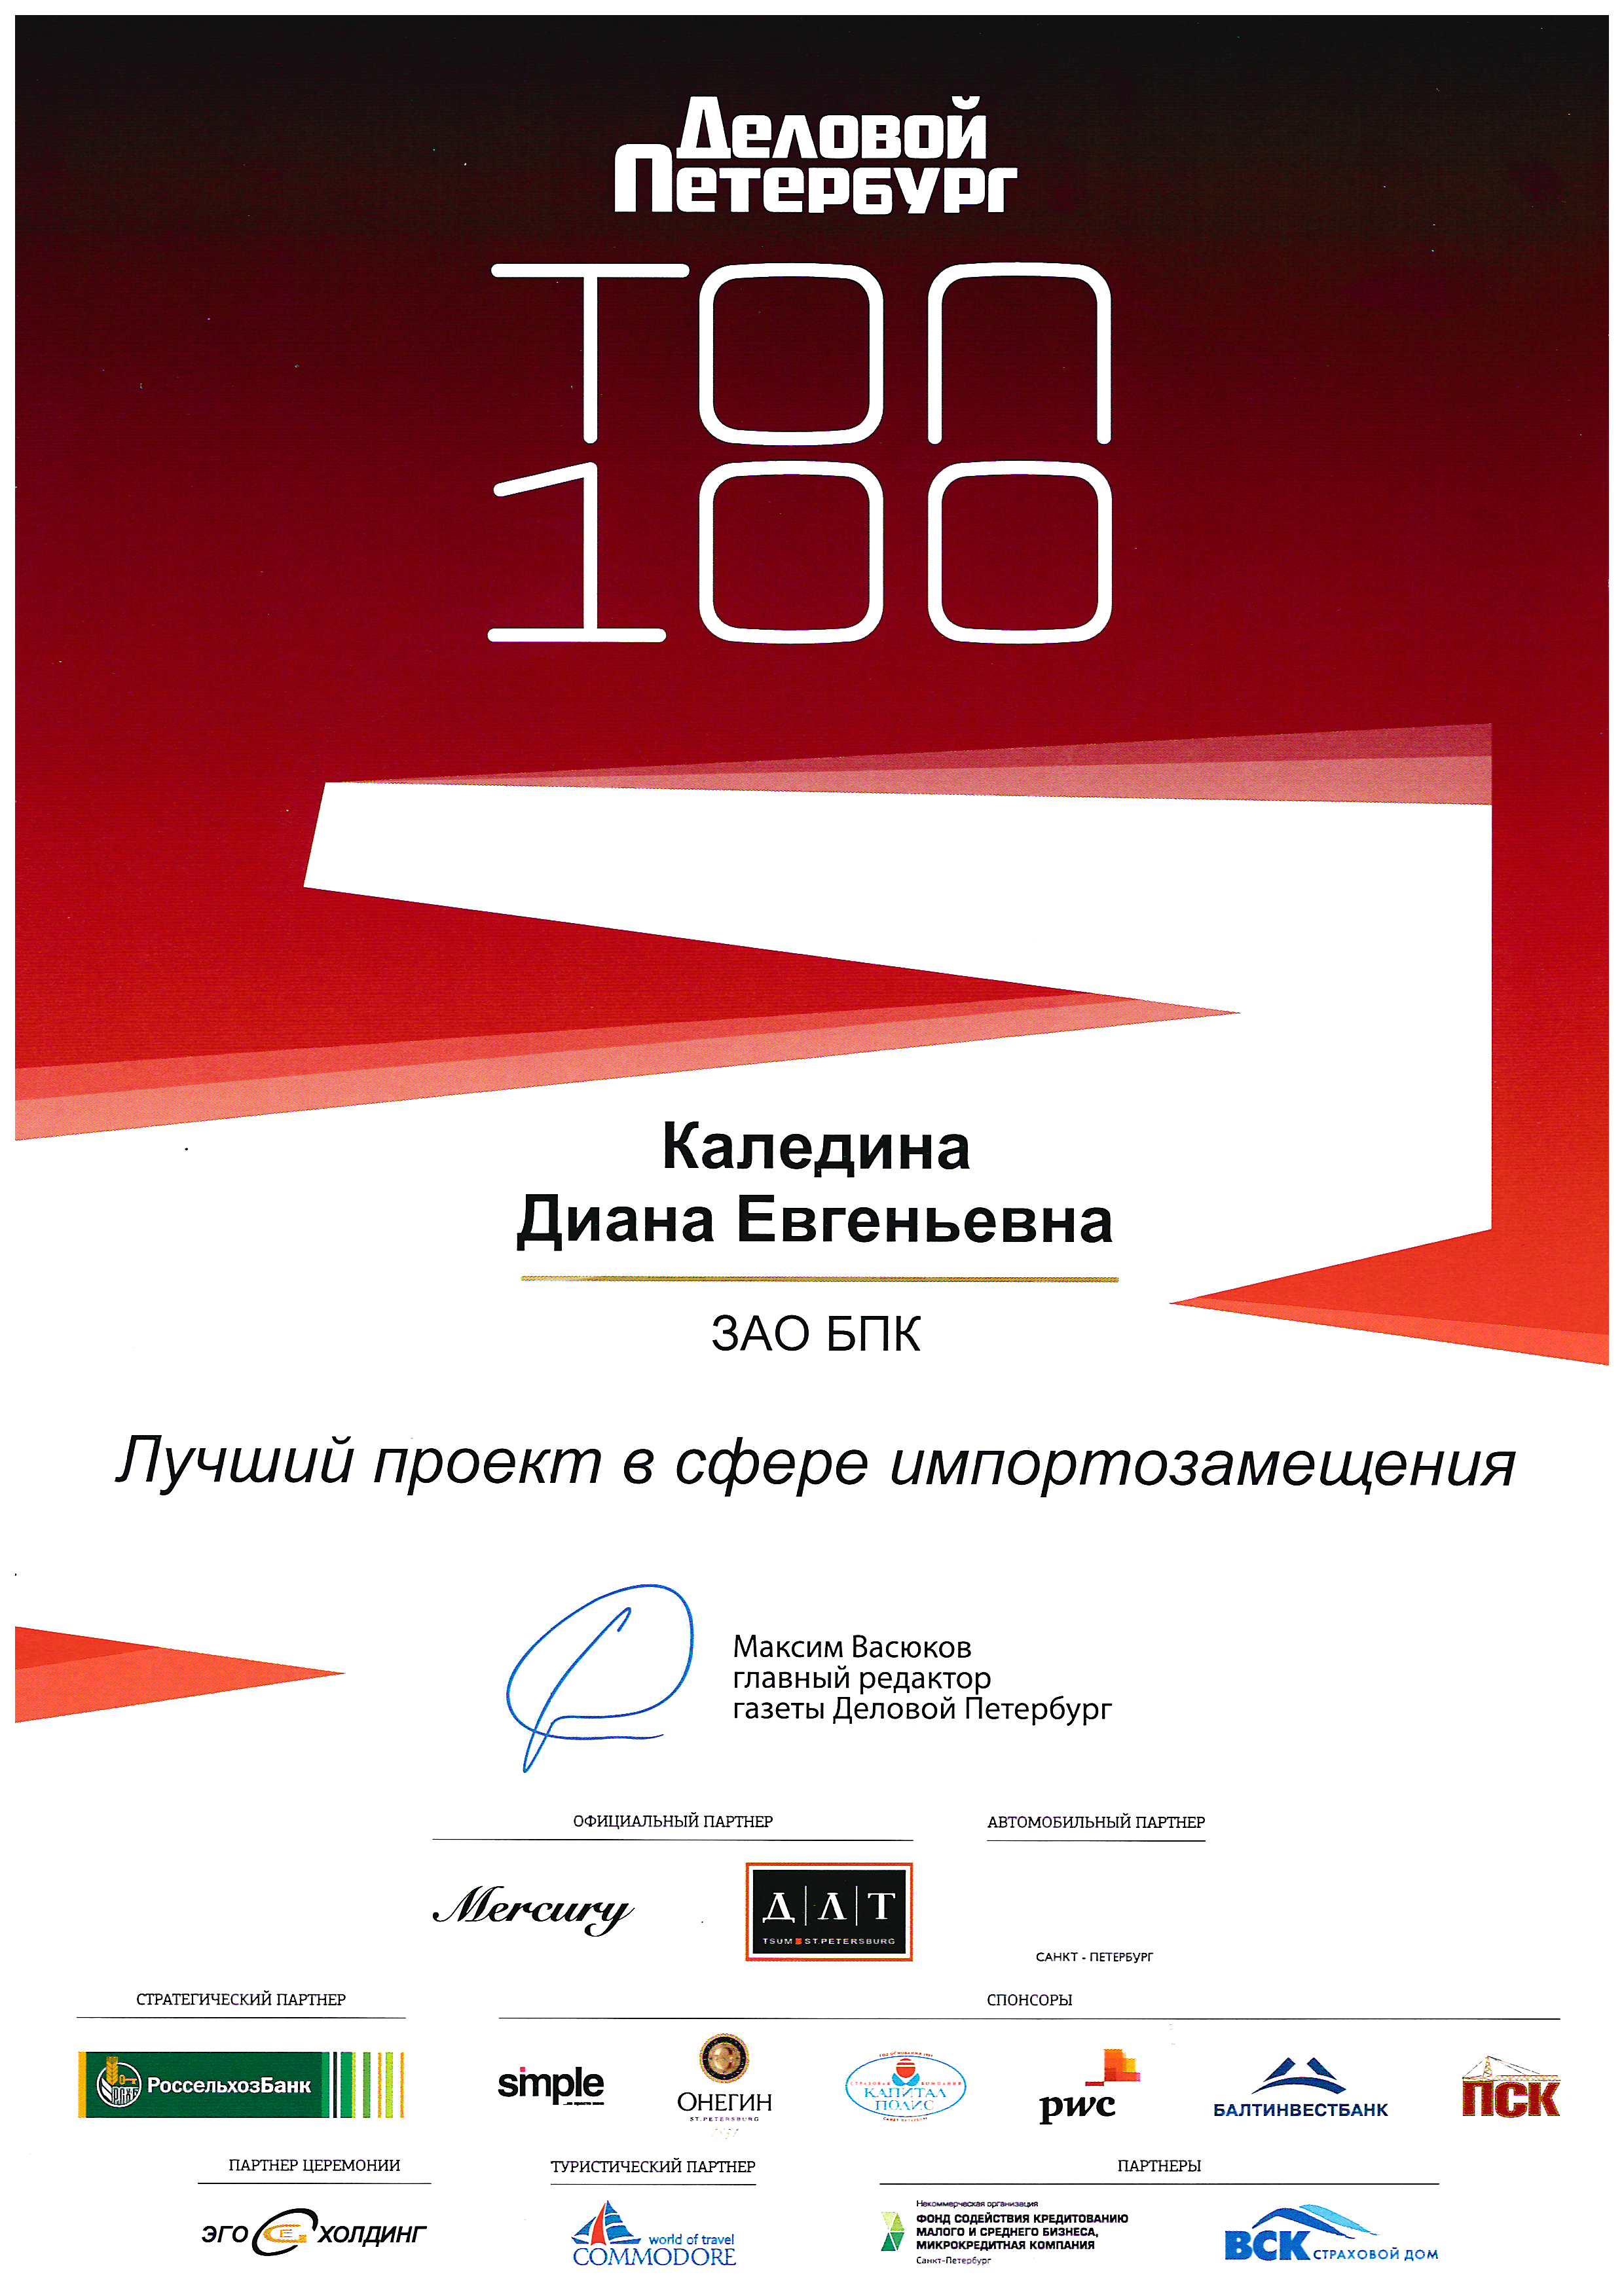 Diploma "The Best project in the field of import substitution" from "Delovoy Petersburg", top-100 Award